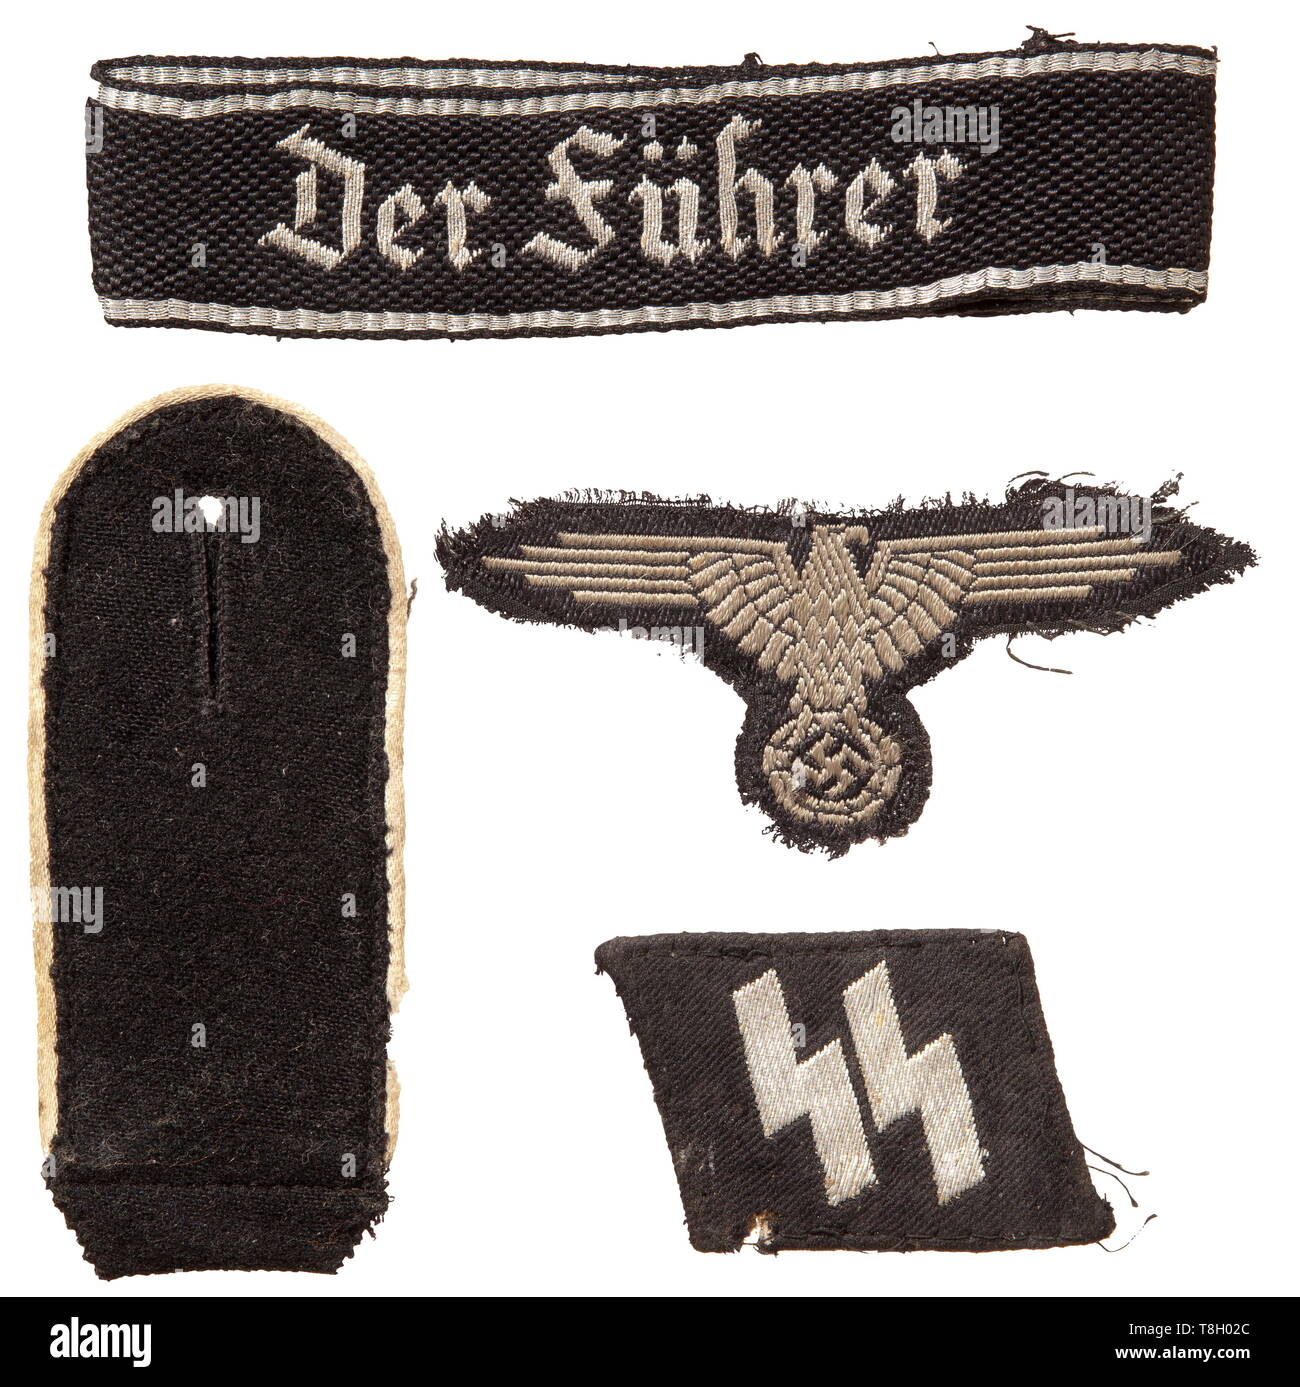 Rottenführer Albin Dunkel, Regiment 'Der Führer' - insignia A cuff title 'Der Führer', 1st model with Gothic script, in silver-woven 'flatwire'-issue for leaders. Used, customized to 36 cm in length, removed from a uniform. A right collar patch with silver-woven SS-runes (flatwire), clearly used with moth damage on reverse. A single shoulder board for enlisted men of the infantry, mothy. A silver-grey woven sleeve eagle (BeVo) on a black base, used and separated from the uniform. historic, historical, 20th century, 1930s, 1940s, Waffen-SS, armed division of the SS, armed se, Editorial-Use-Only Stock Photo